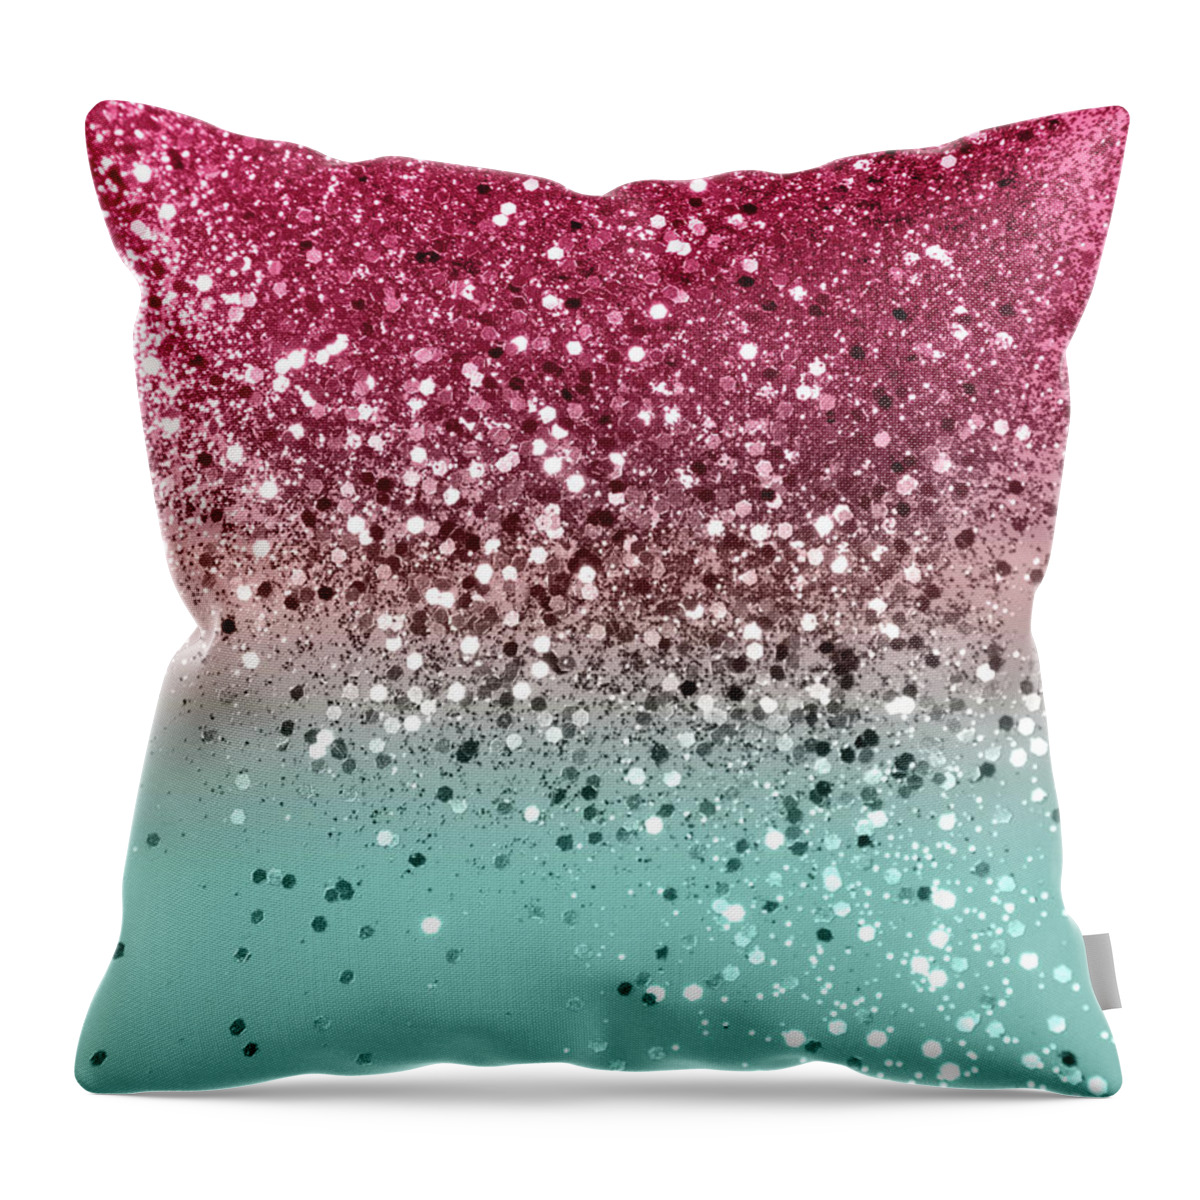 Faux-glitter Throw Pillow featuring the mixed media Tropical Watermelon Glitter #4 Faux Glitter #decor #art by Anitas and Bellas Art